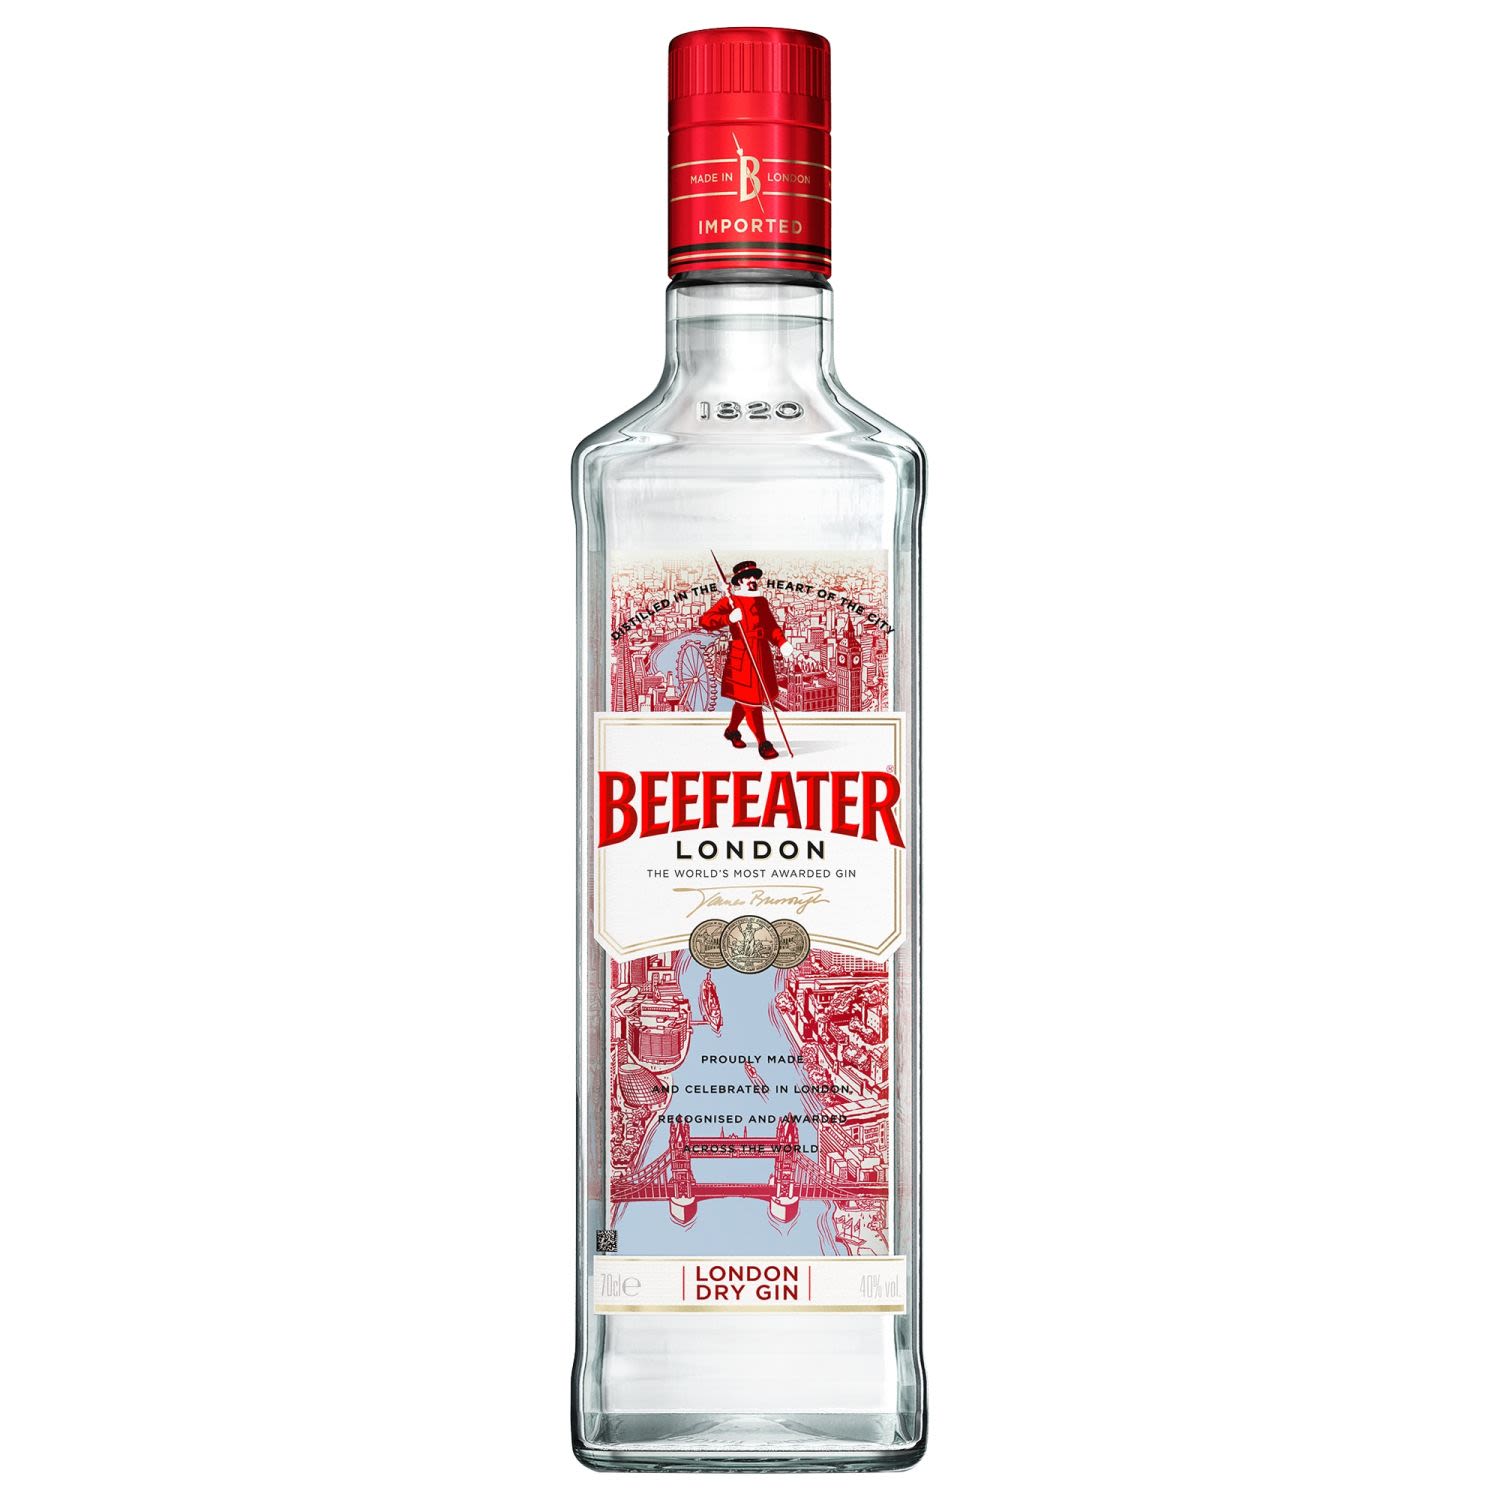 Beefeater London Dry Gin 700mL Bottle